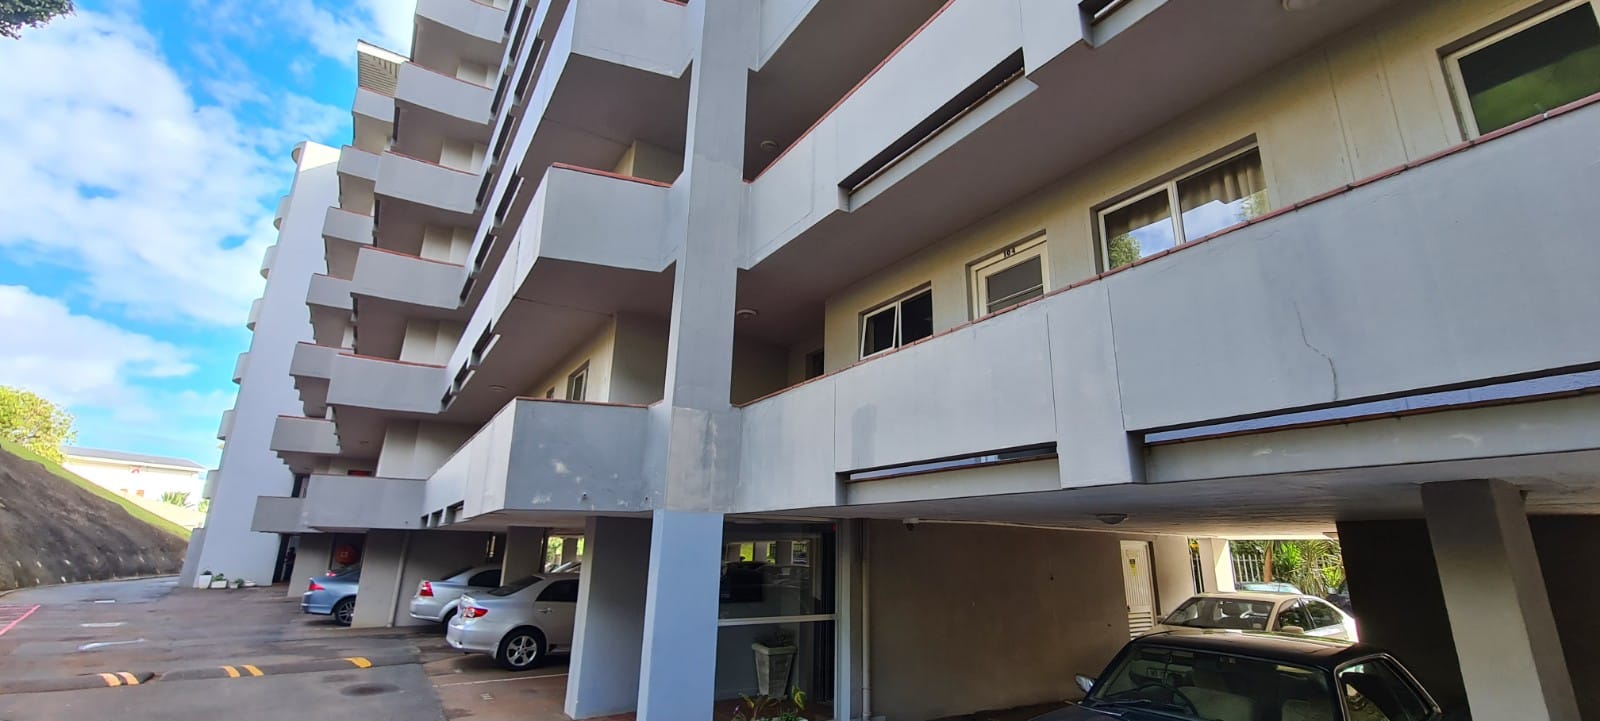 3 Bedroom Apartment / Flat  For Sale in Umgeni Park | 1350455 | Property.CoZa